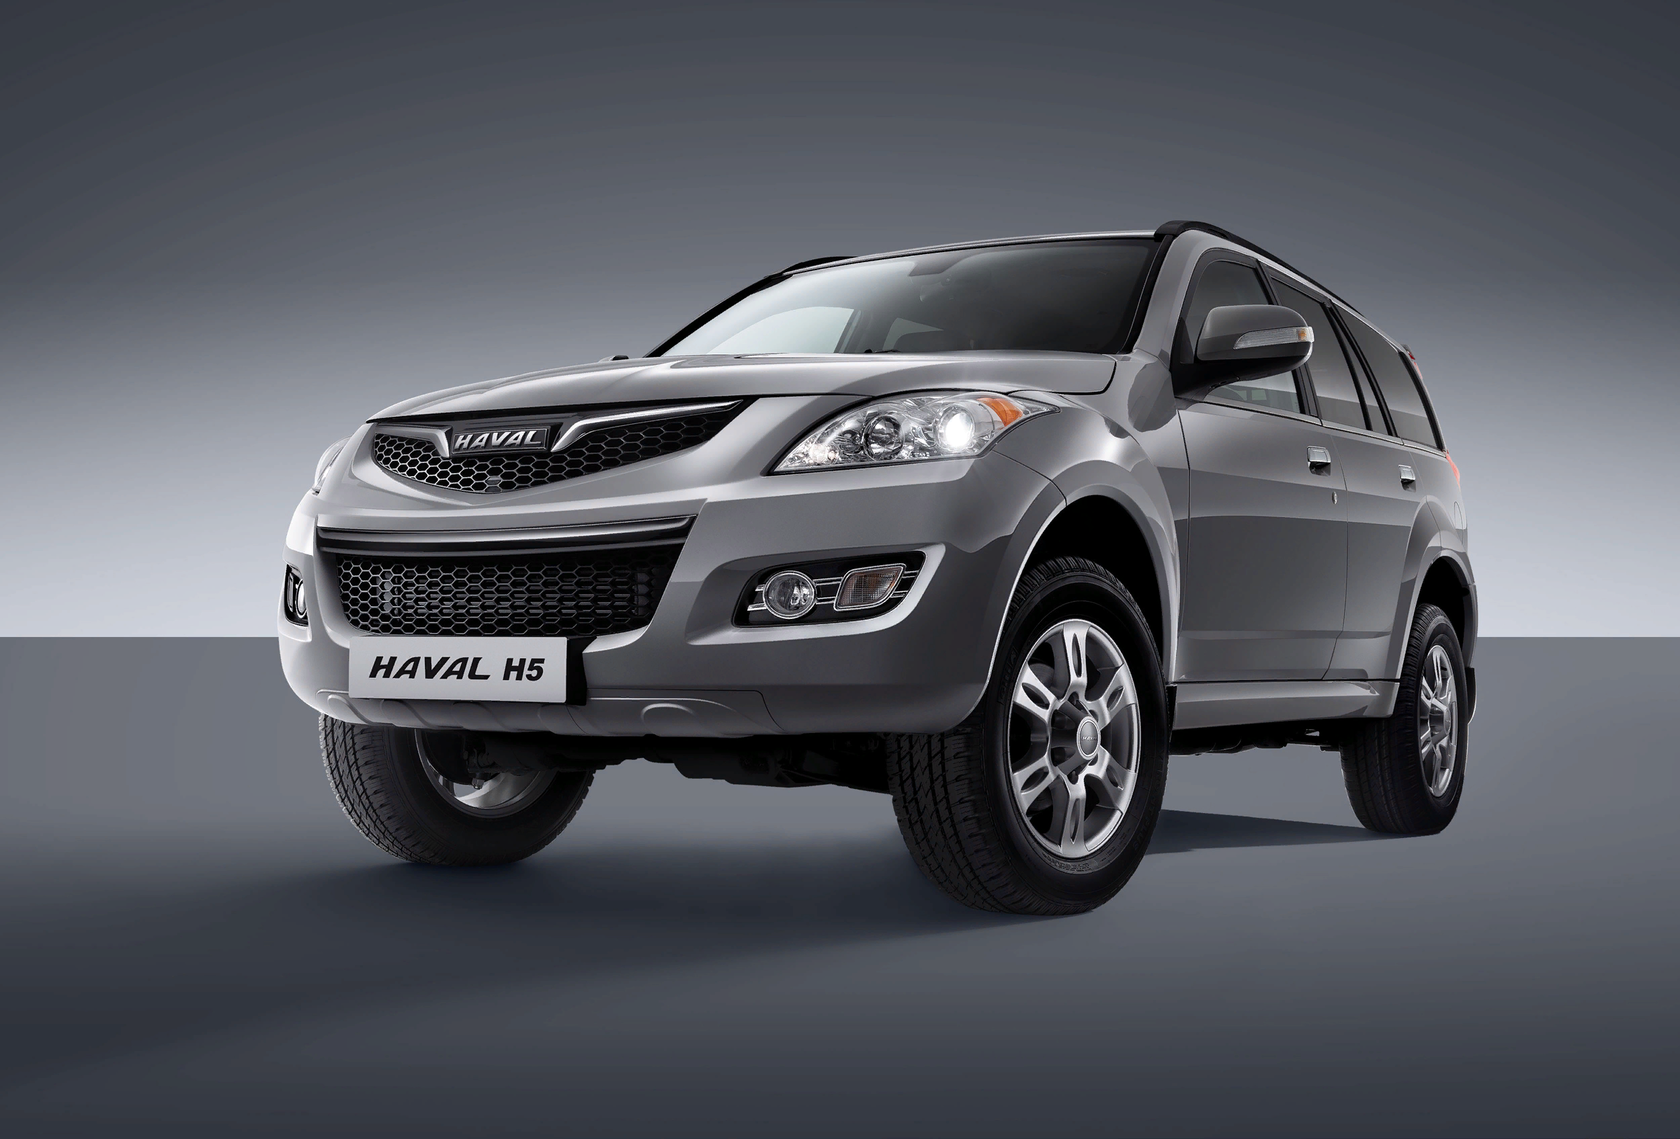 Ховер н5 2014. Haval Hover h5. Great Wall Haval h5. Great Wall Haval 5. Great Wall Haval h5 2020.